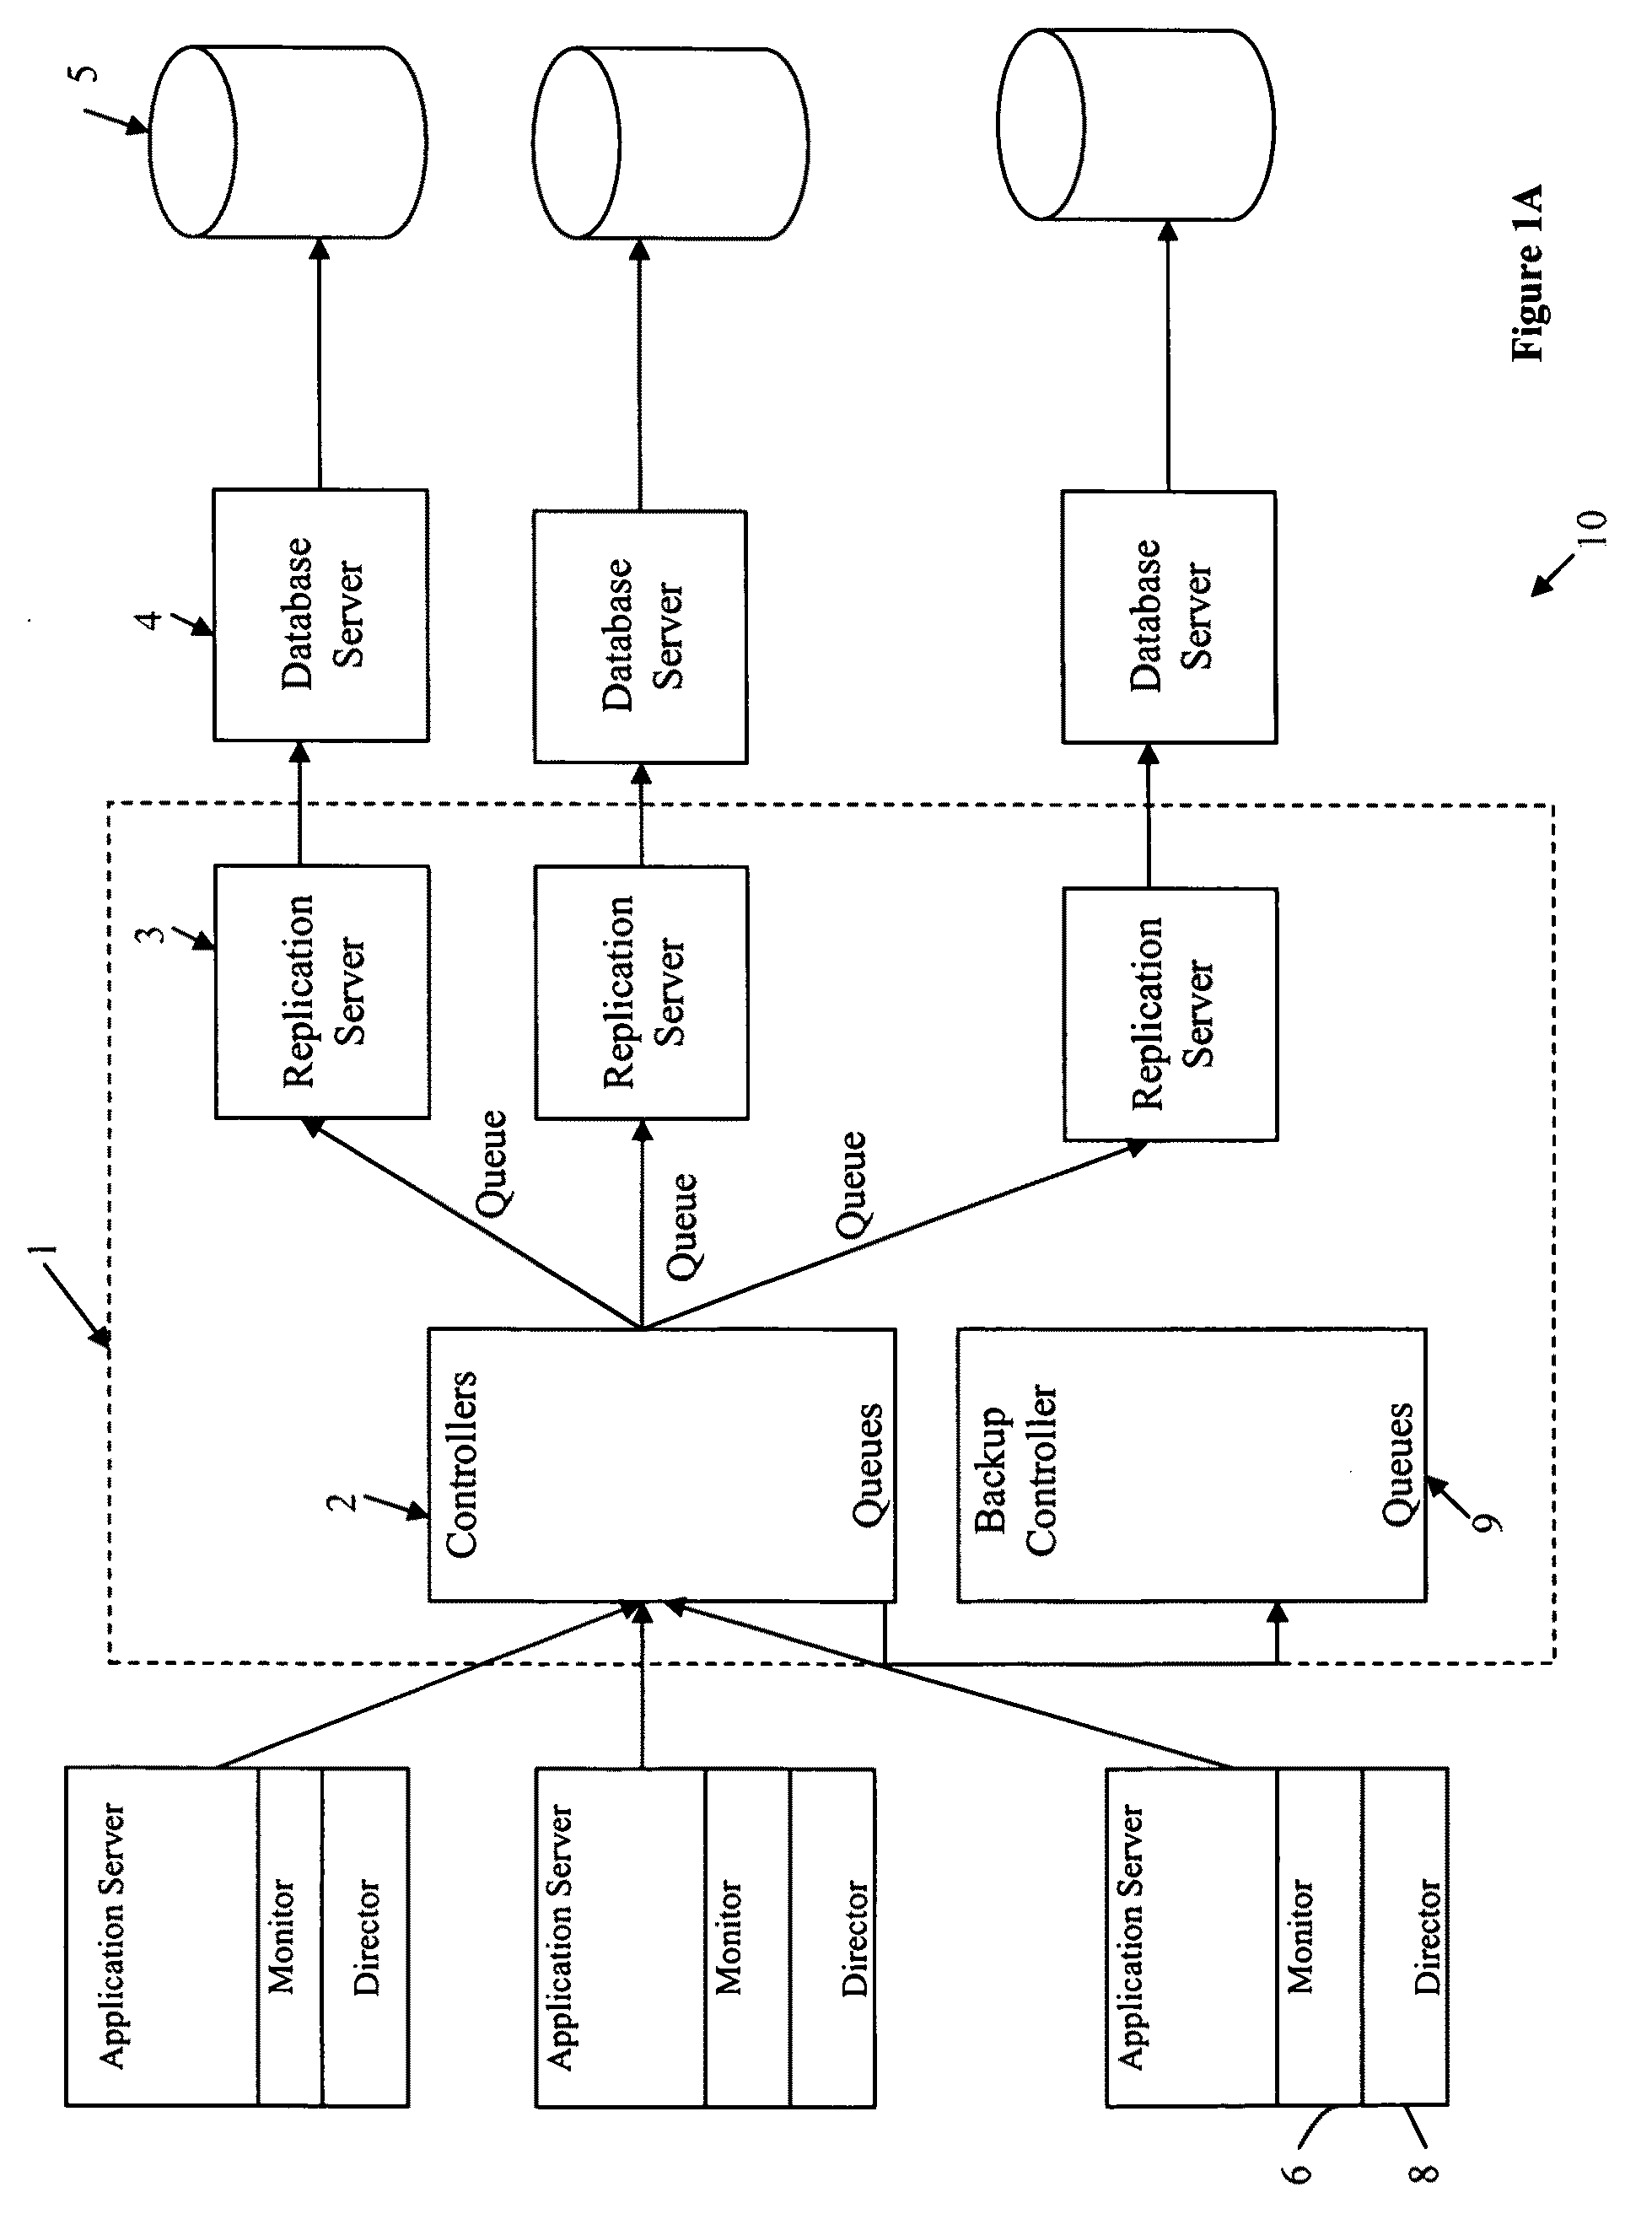 Method and apparatus for sequencing transactions globally in a distributed database cluster